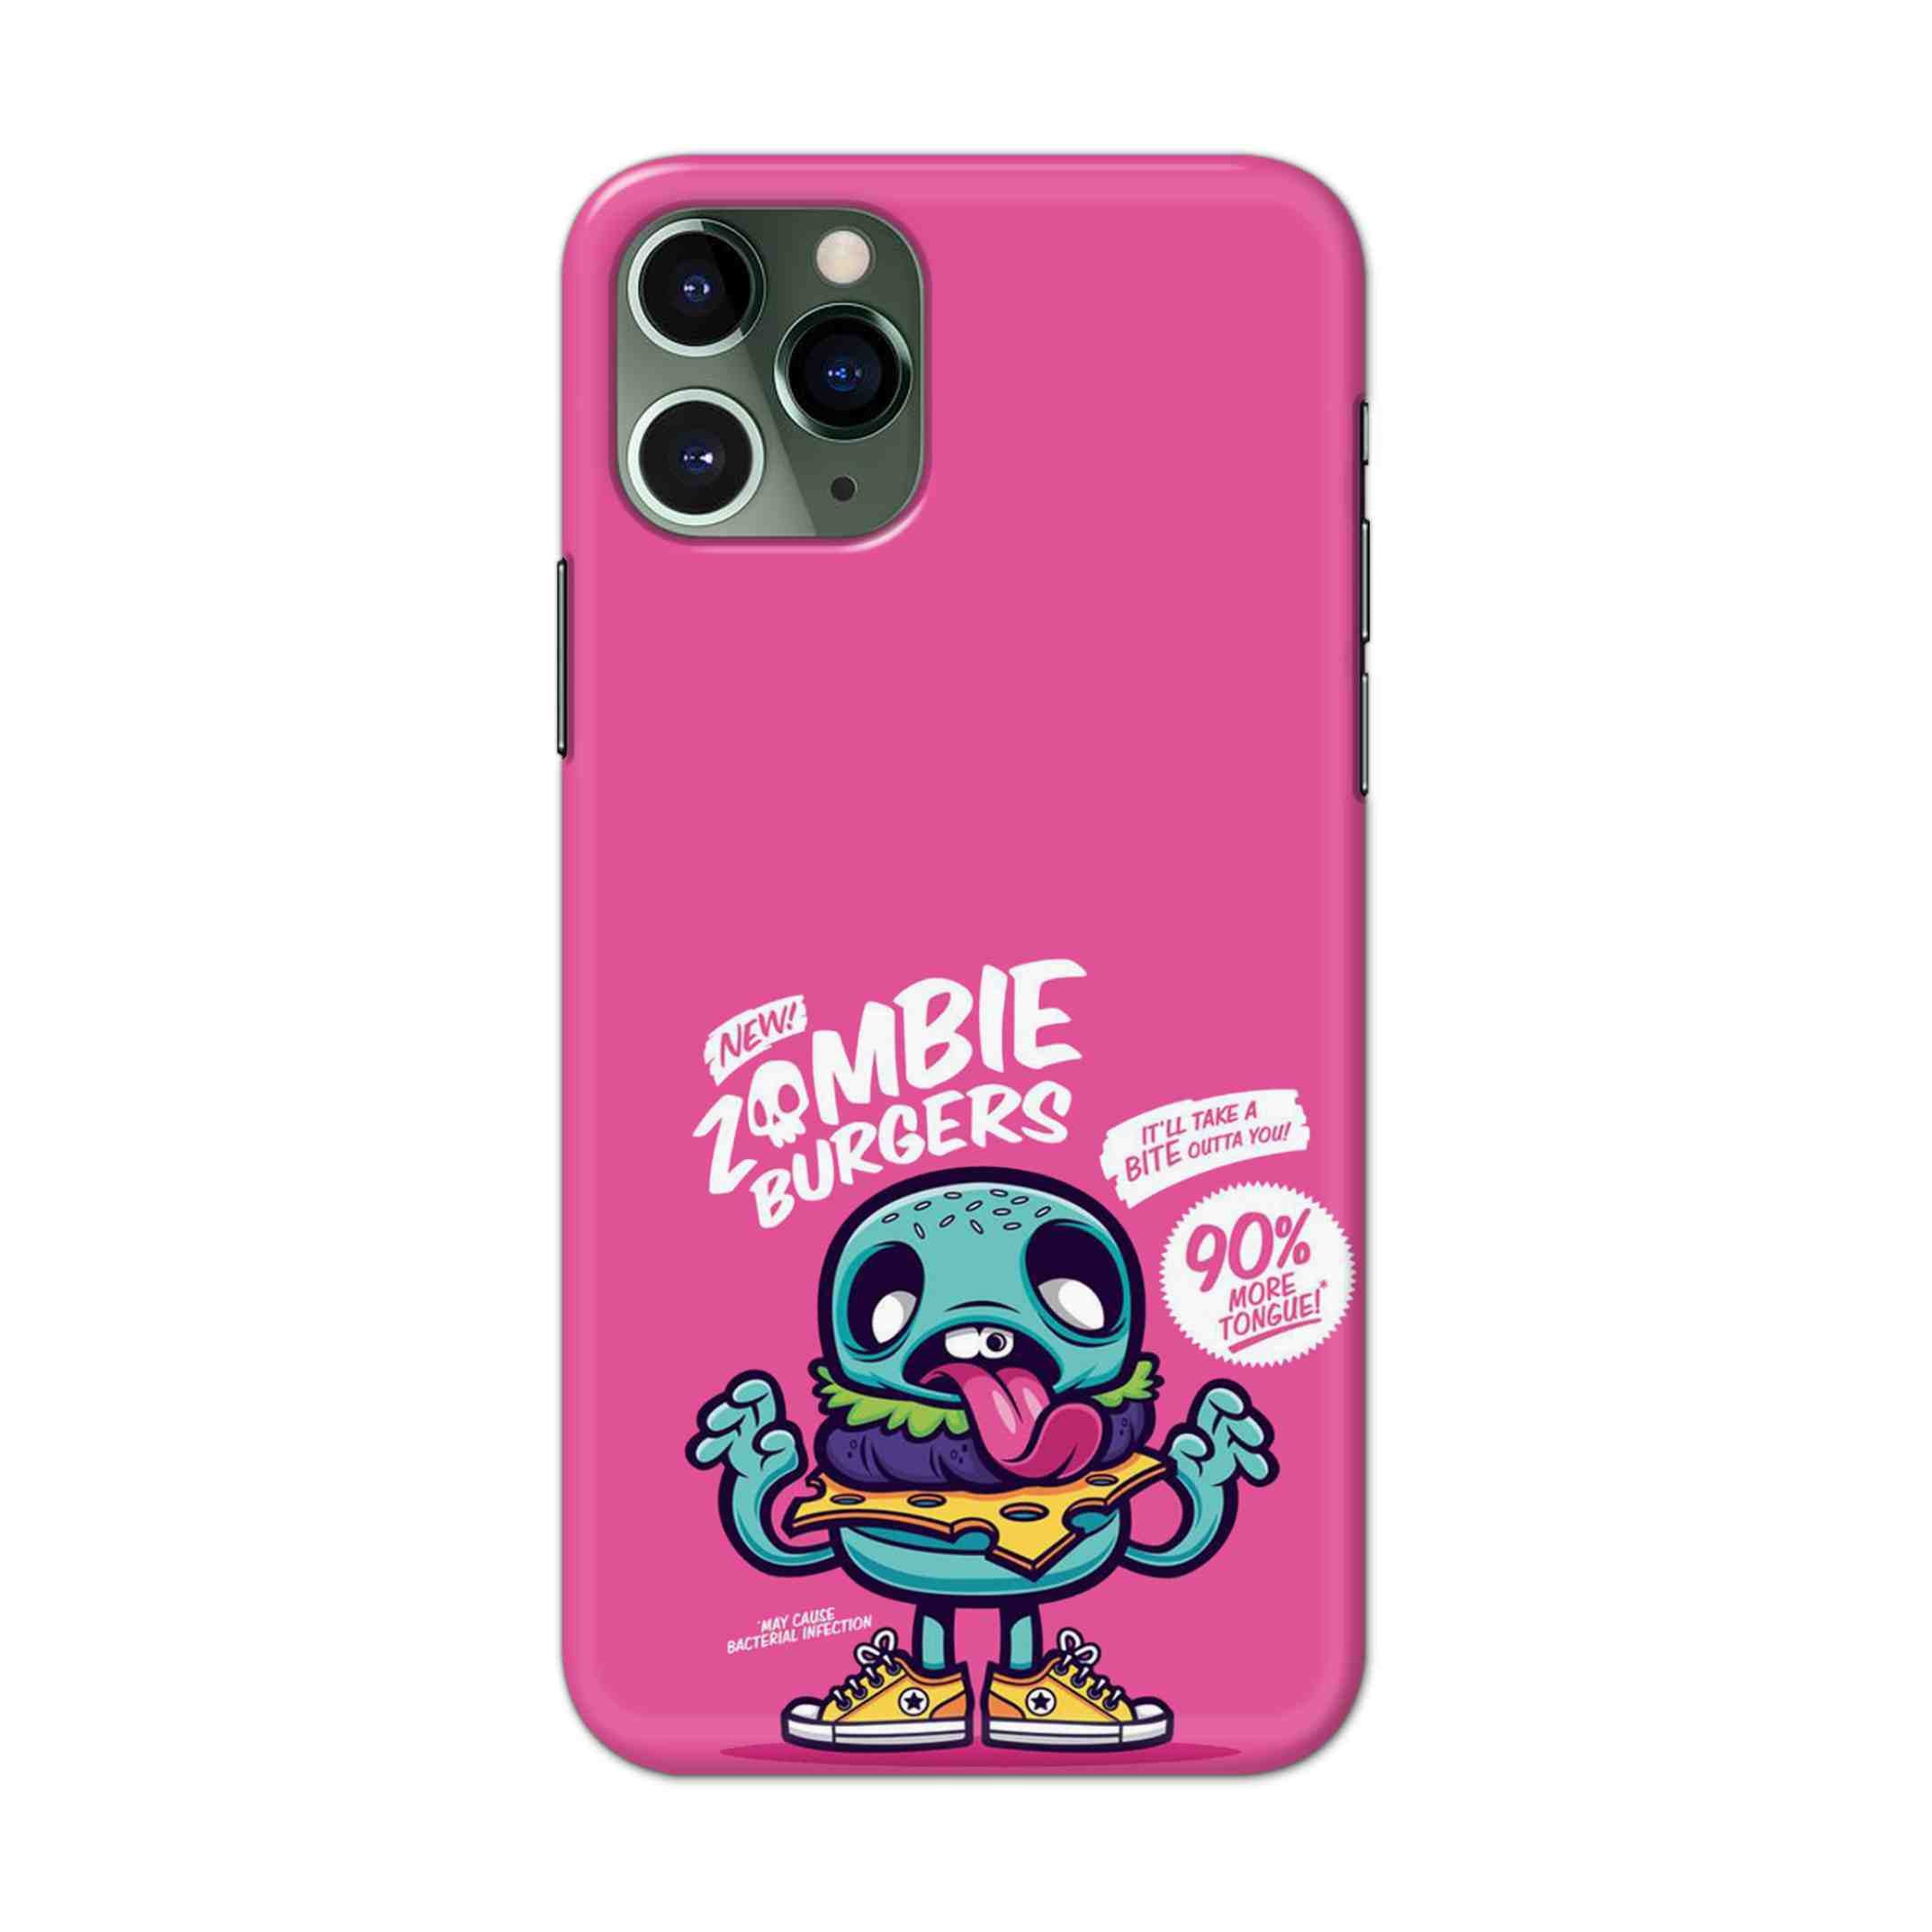 Buy New Zombie Burgers Hard Back Mobile Phone Case/Cover For iPhone 11 Pro Online